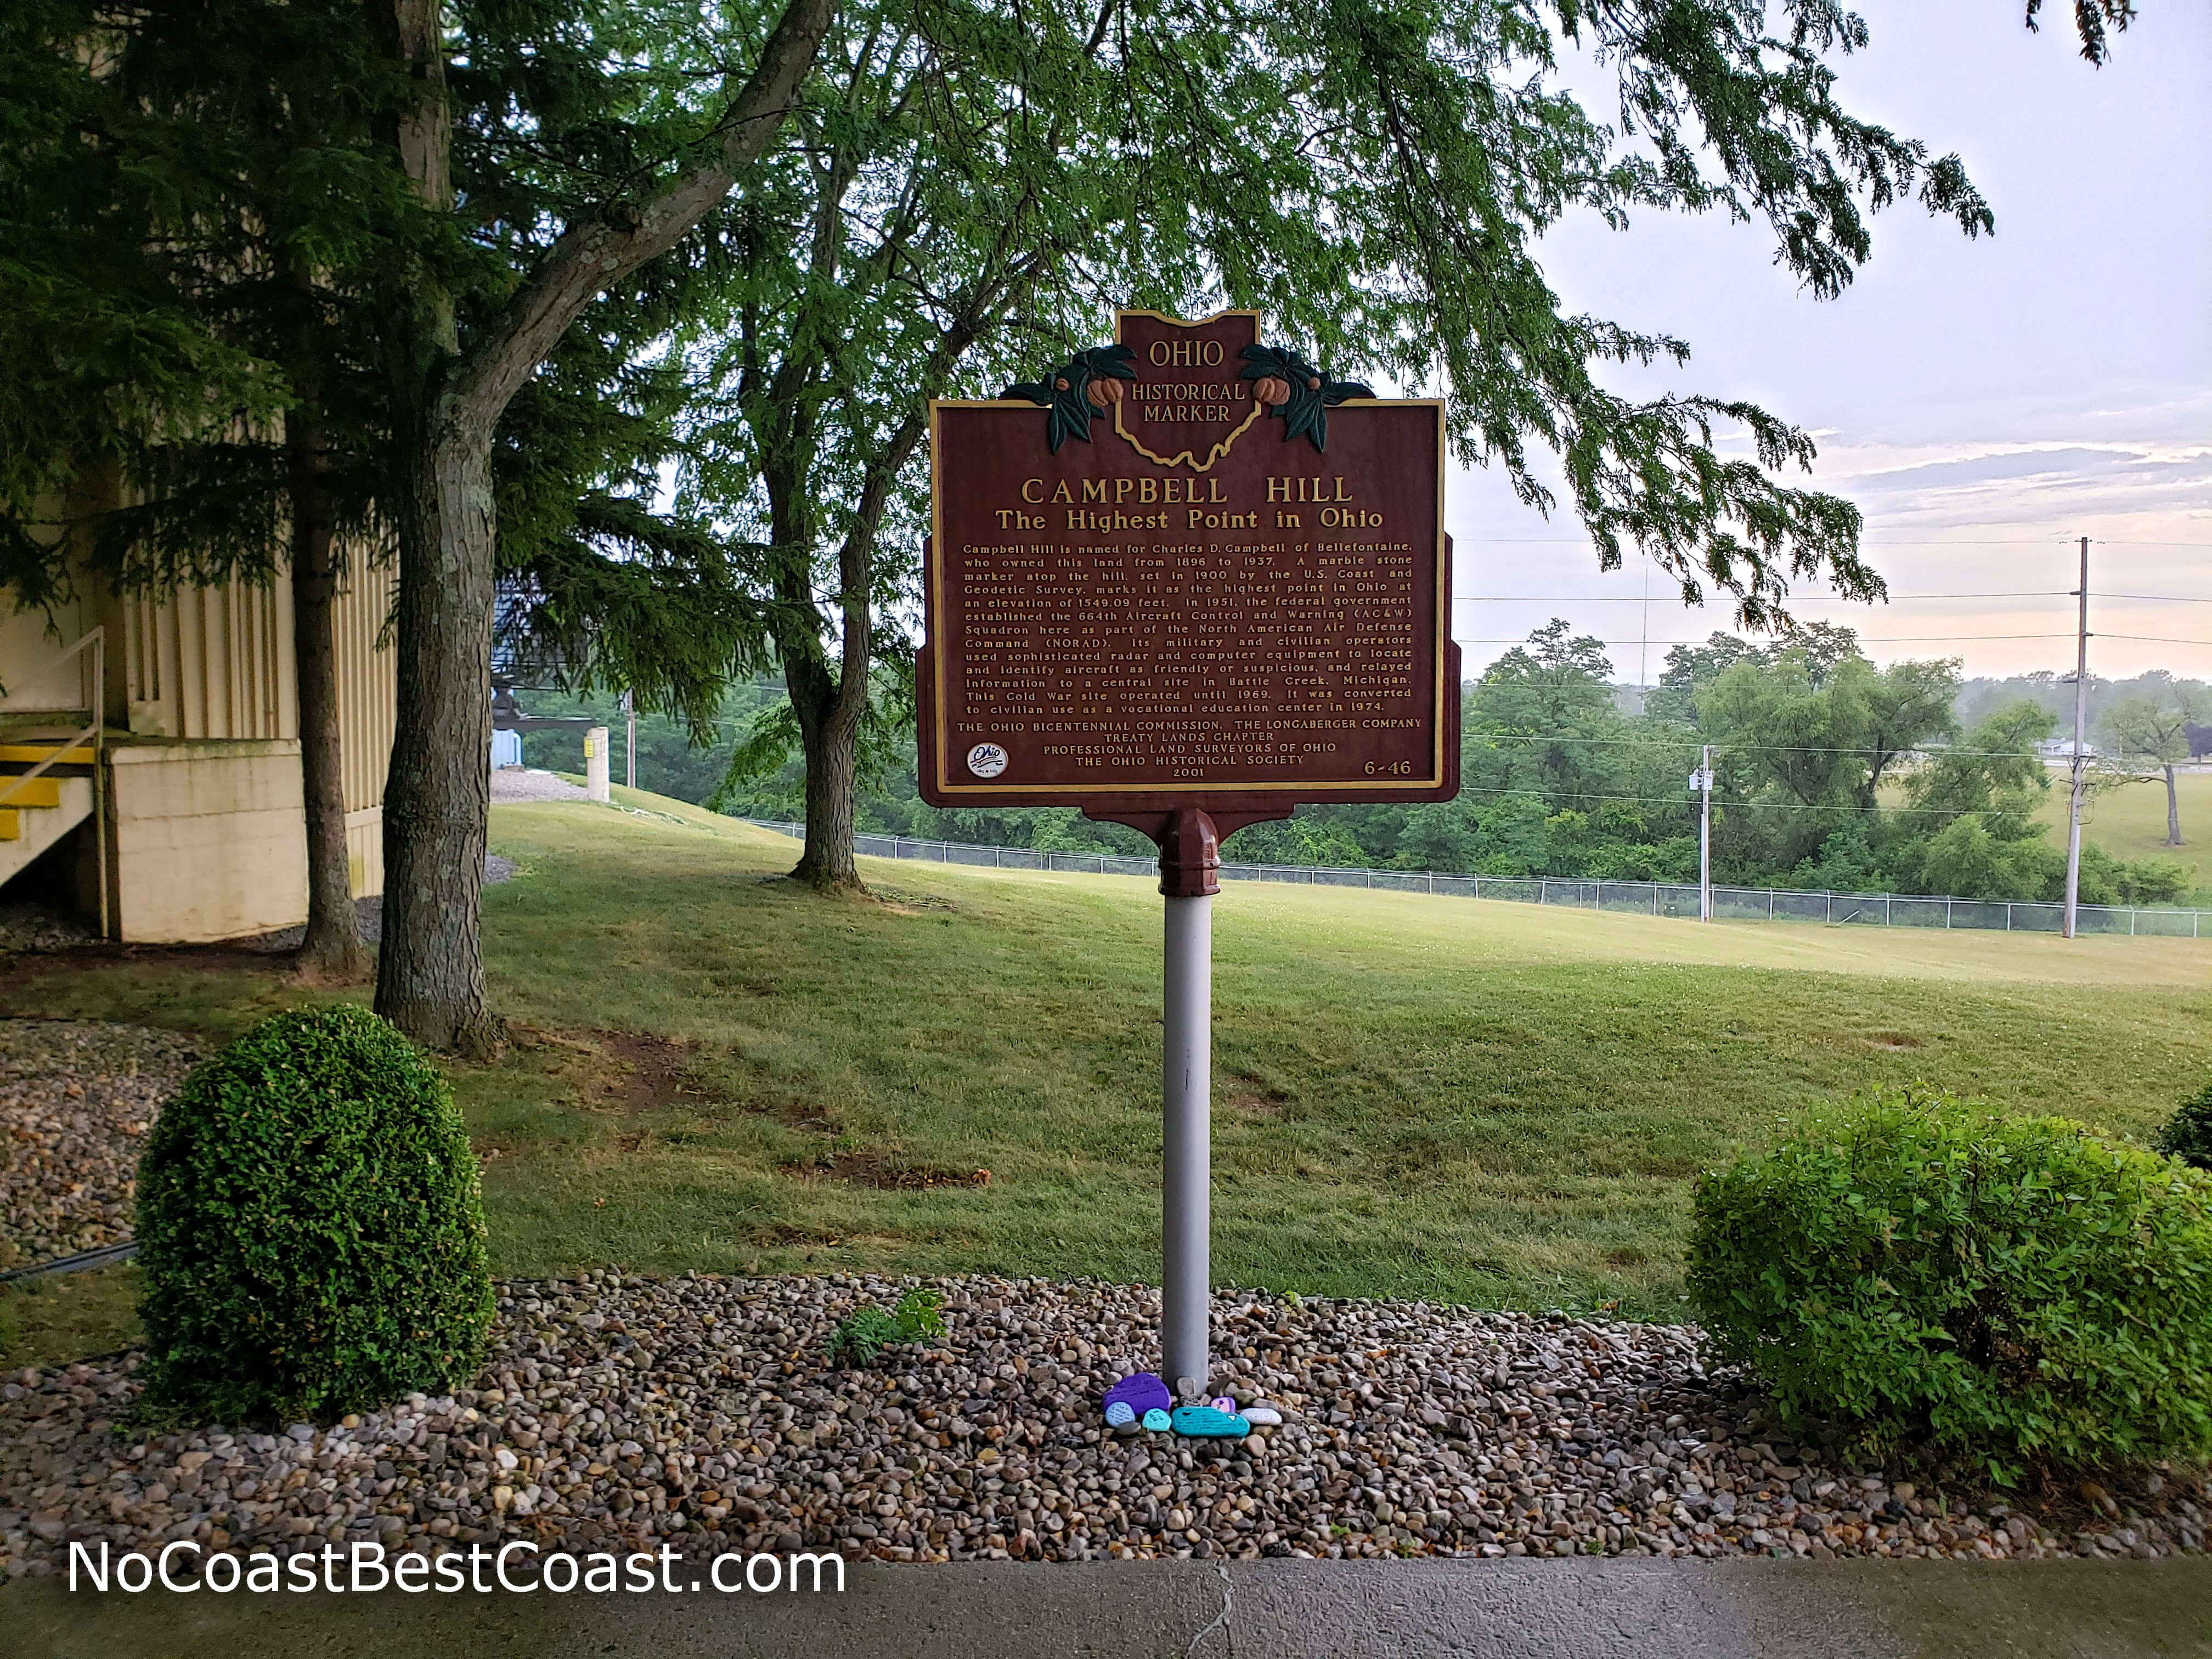 The historical marker for Campbell Hill